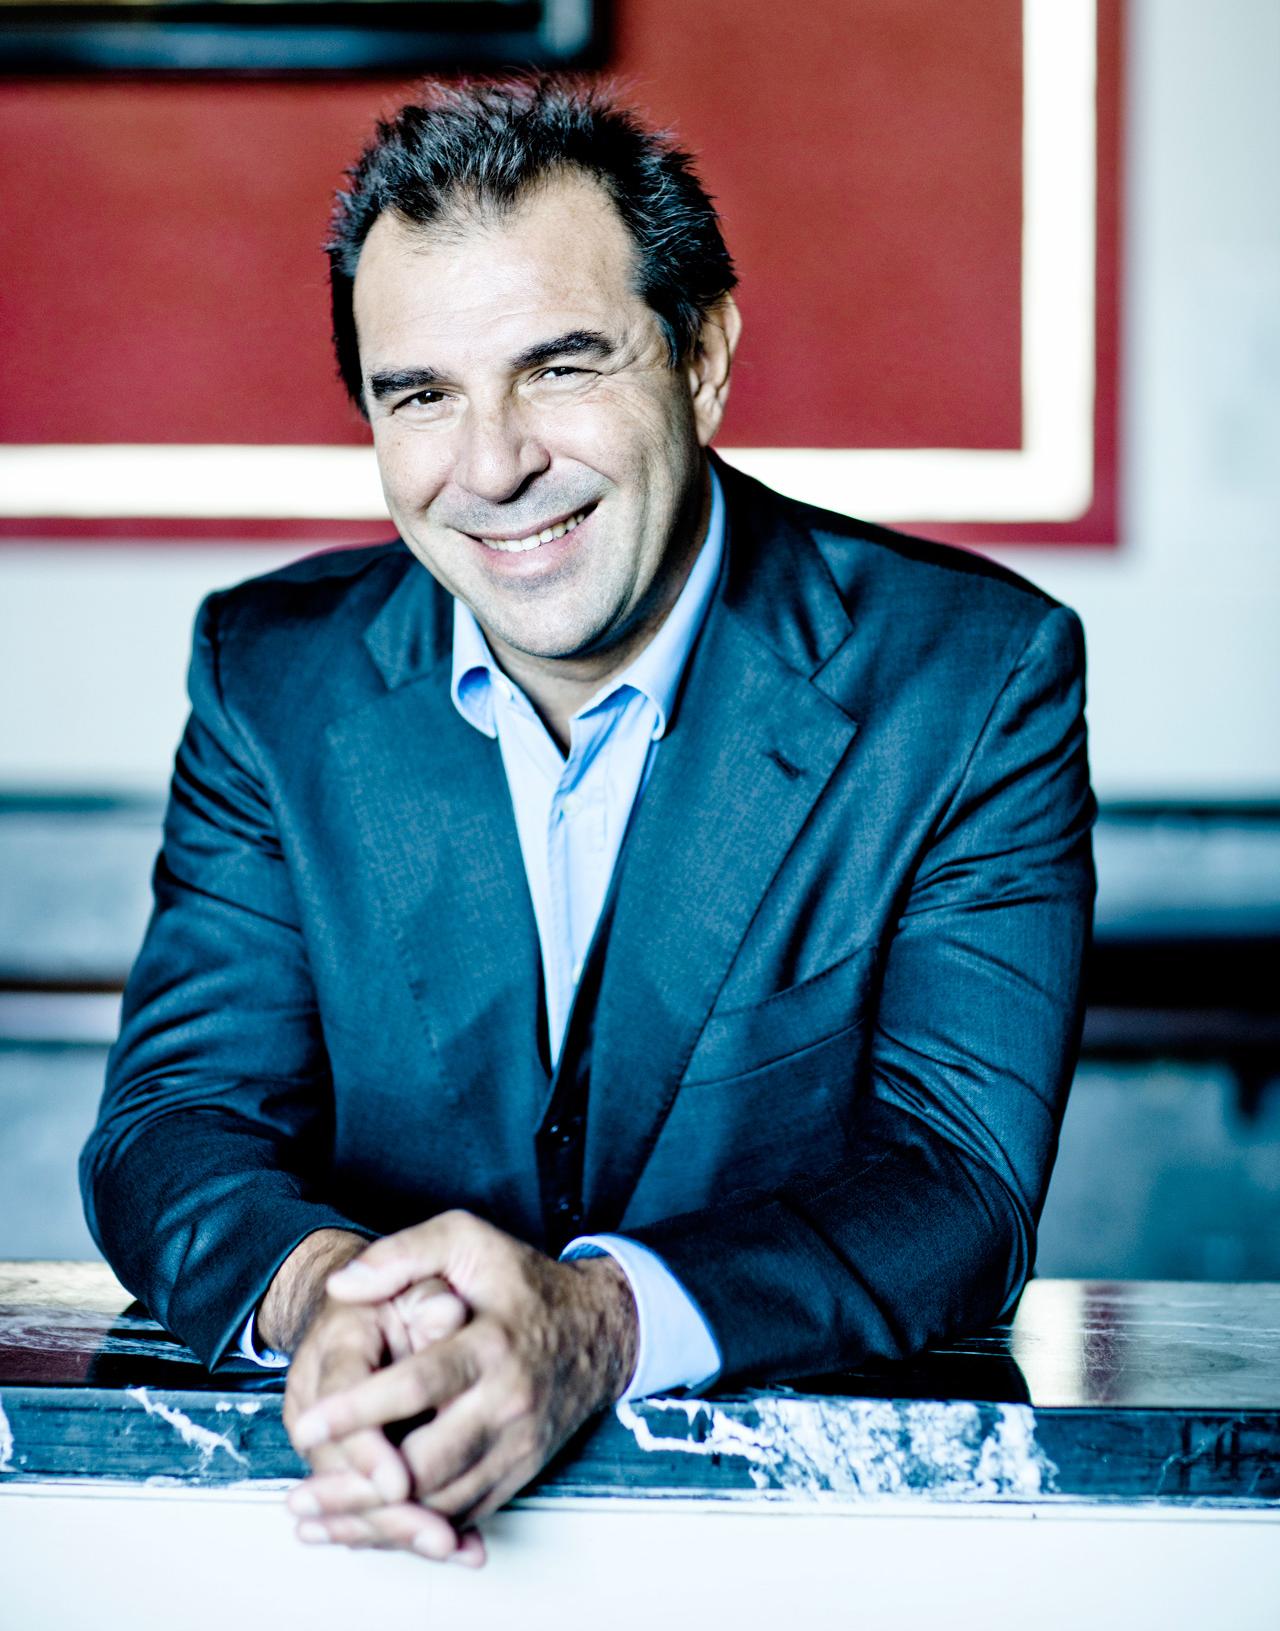 Conductor Daniele Gatti leans with his arms on a counter and laughs into the camera